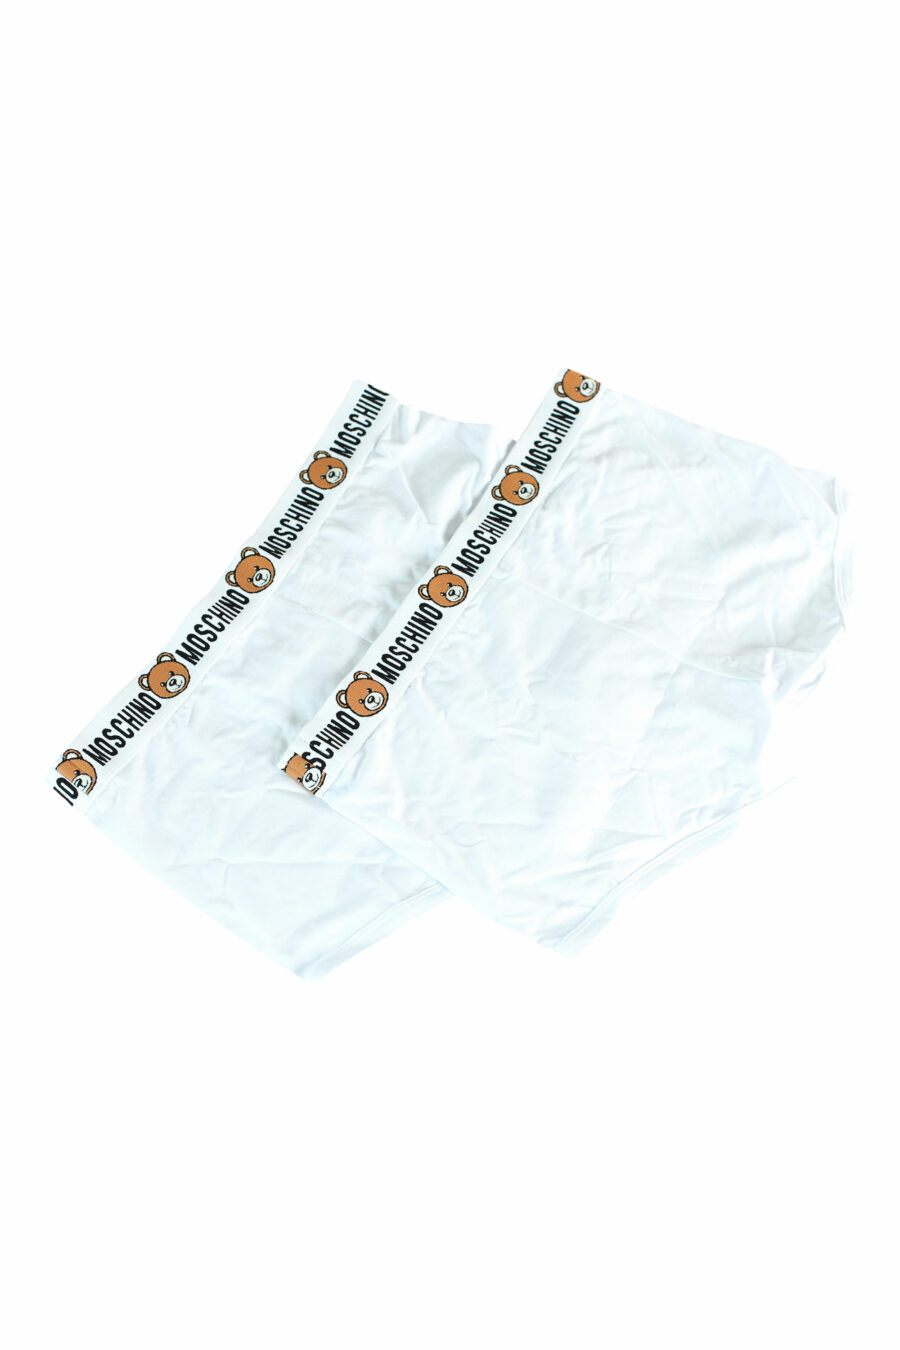 Pack of two white boxers with bear logo on waistband - 889316228885 2